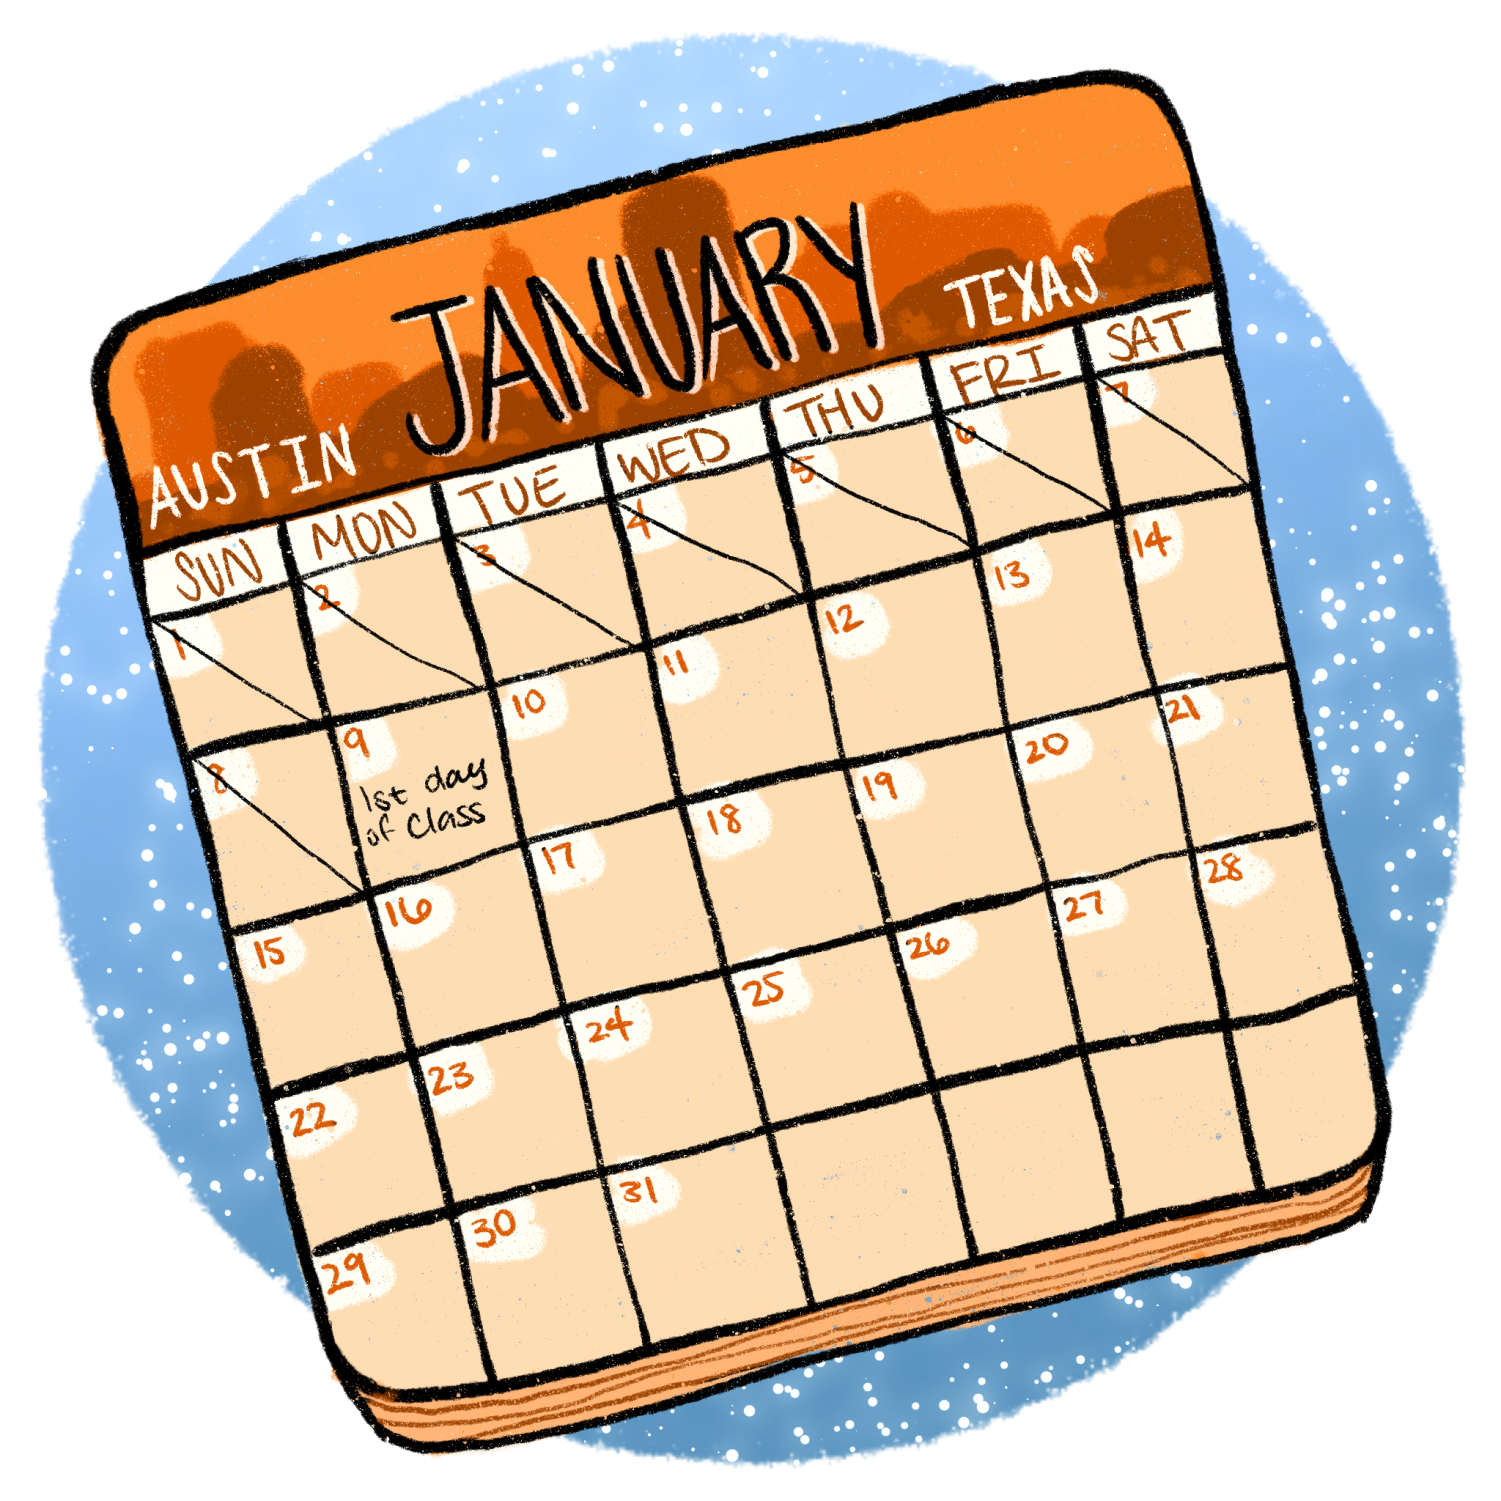 Around Austin Events, things to do this January The Daily Texan